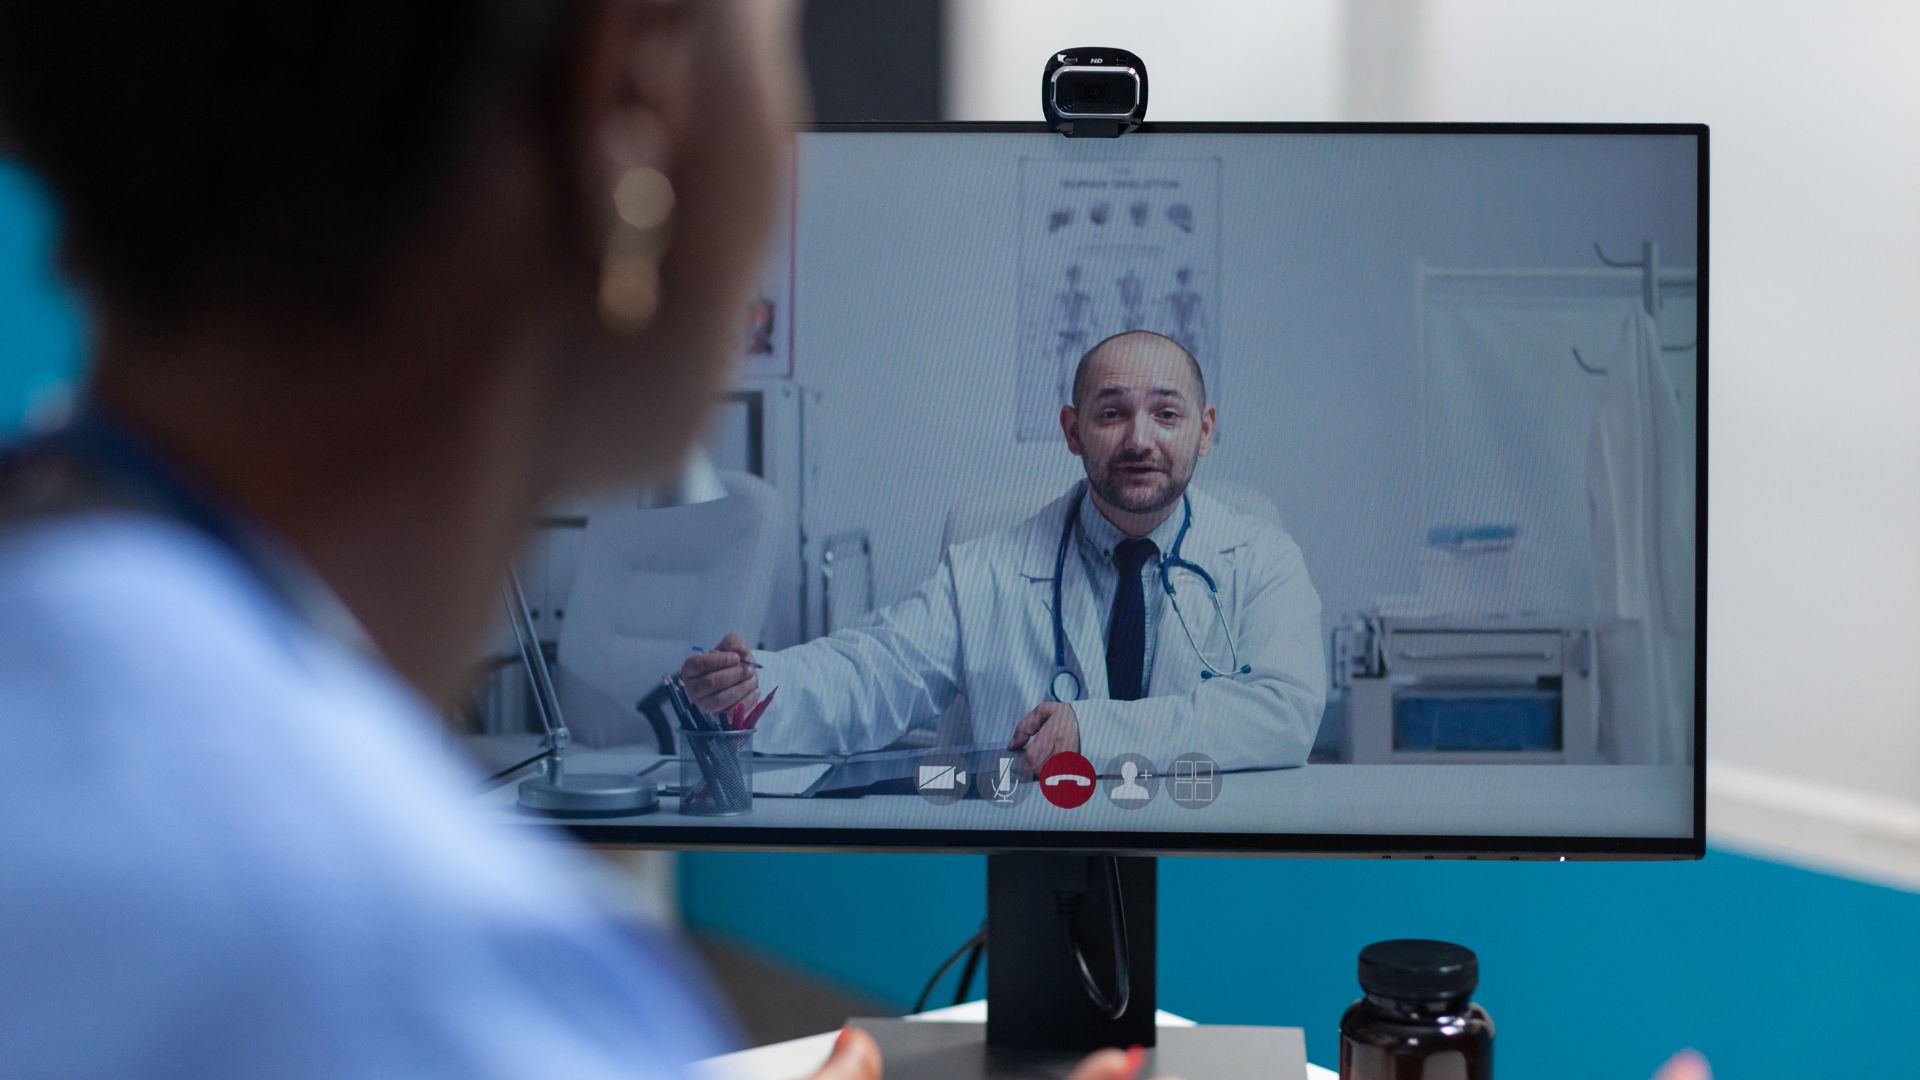 promoting telemedicine and virtual care services through healthcare marketing